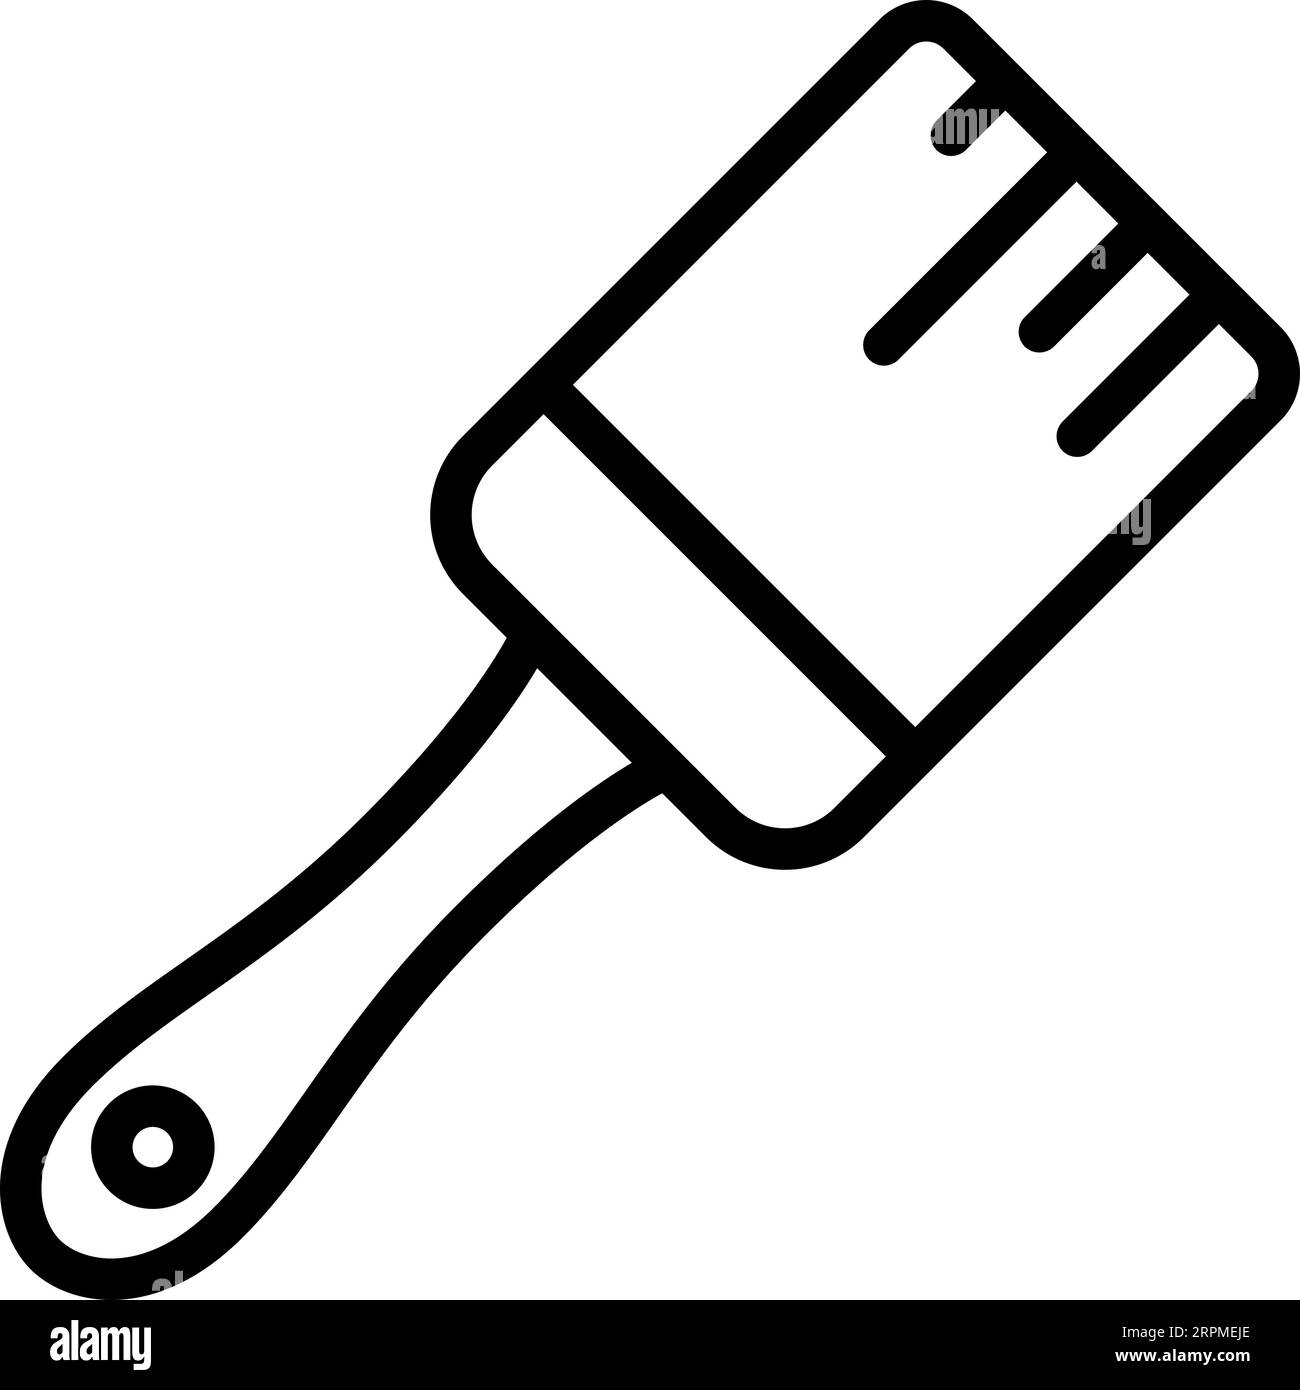 Line paint brush icon for web design Stock Vector